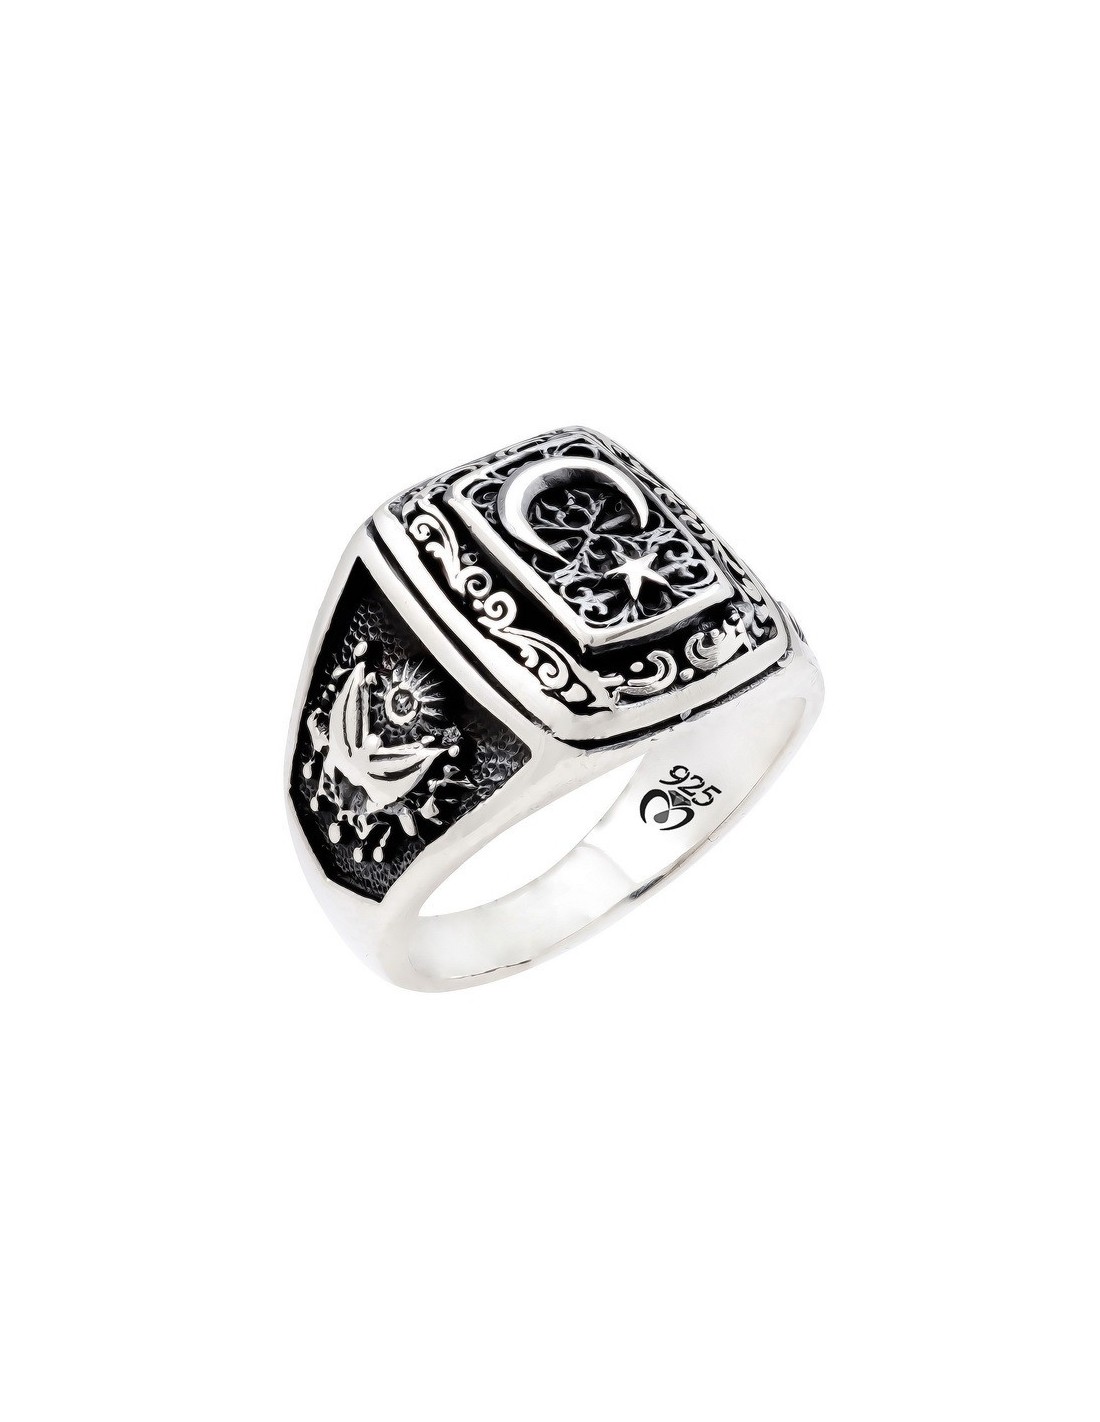 Moon Star Double Headed Eagle Mens 925s Silver Ring